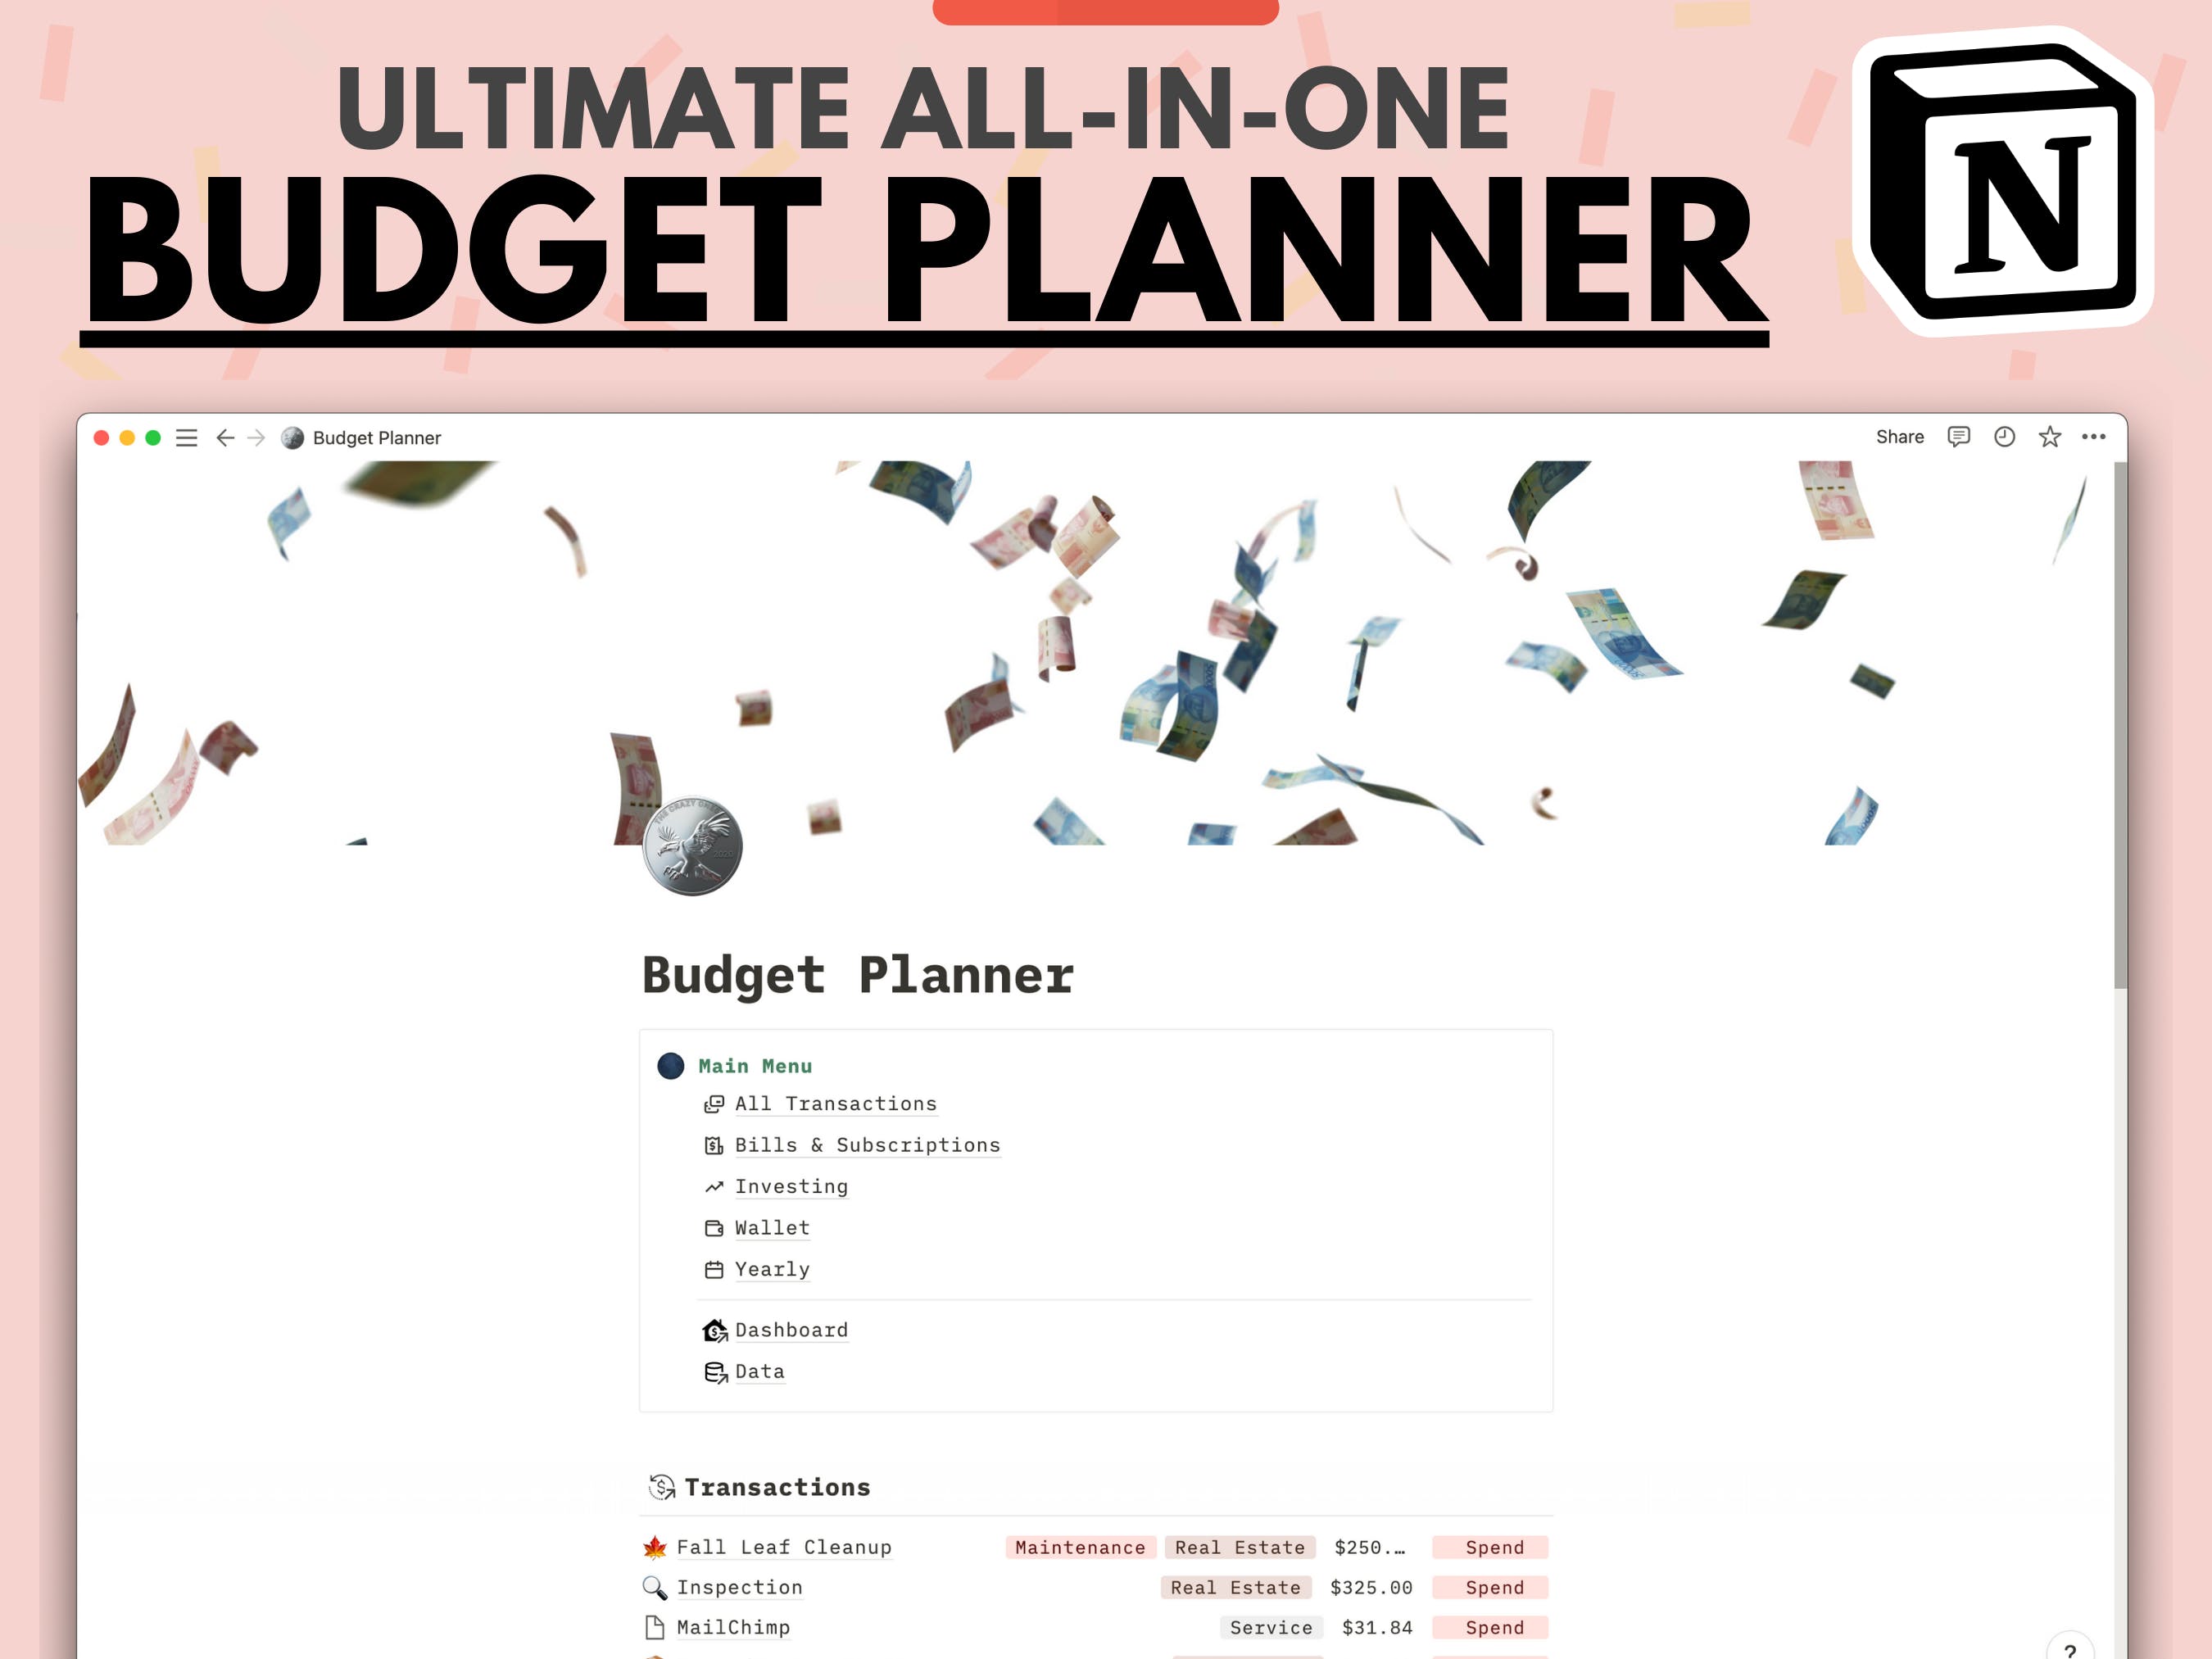 Ultimate All-in-One Budget Planner media 2